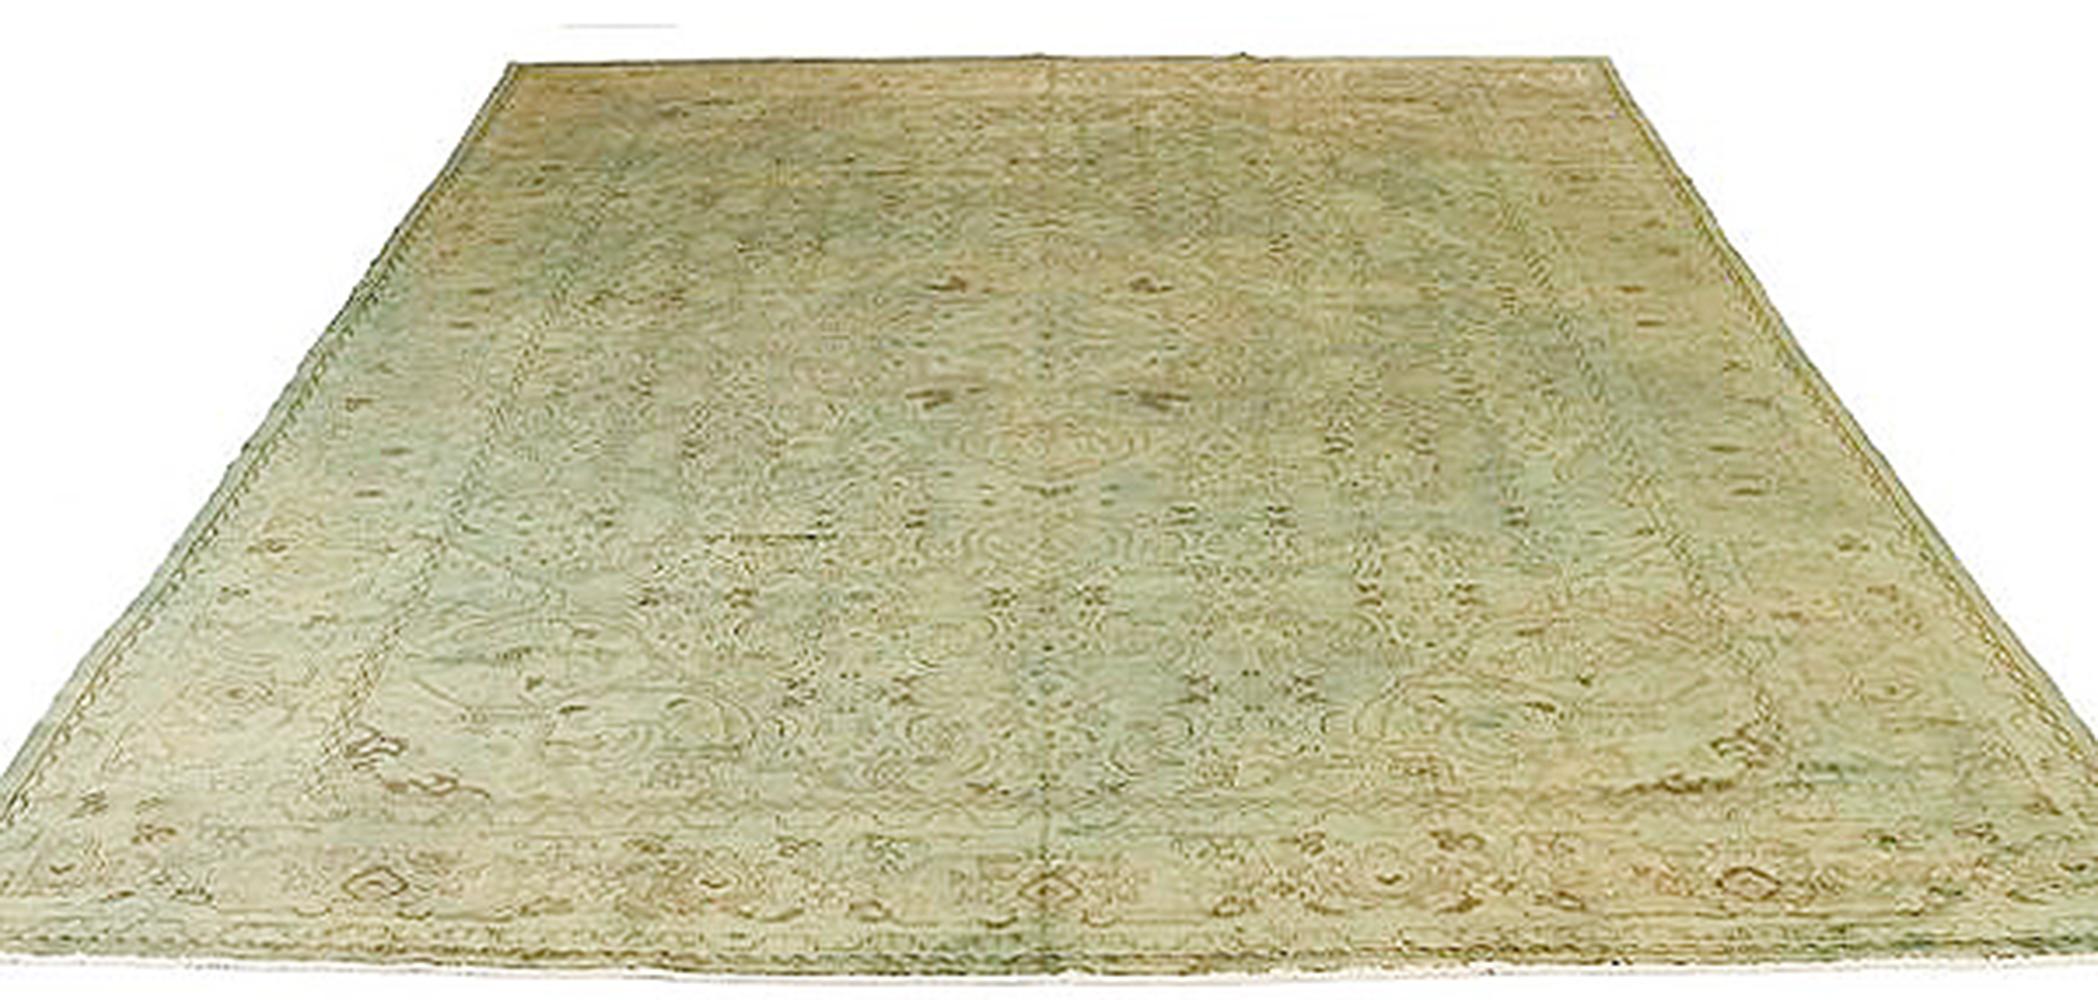 Vintage Persian rug handwoven from the finest sheep’s wool and colored with all-natural vegetable dyes that are safe for humans and pets. It’s an overdyed piece featuring a green and brown traditional motif. It has a dimension of 10’ x 13’2” which